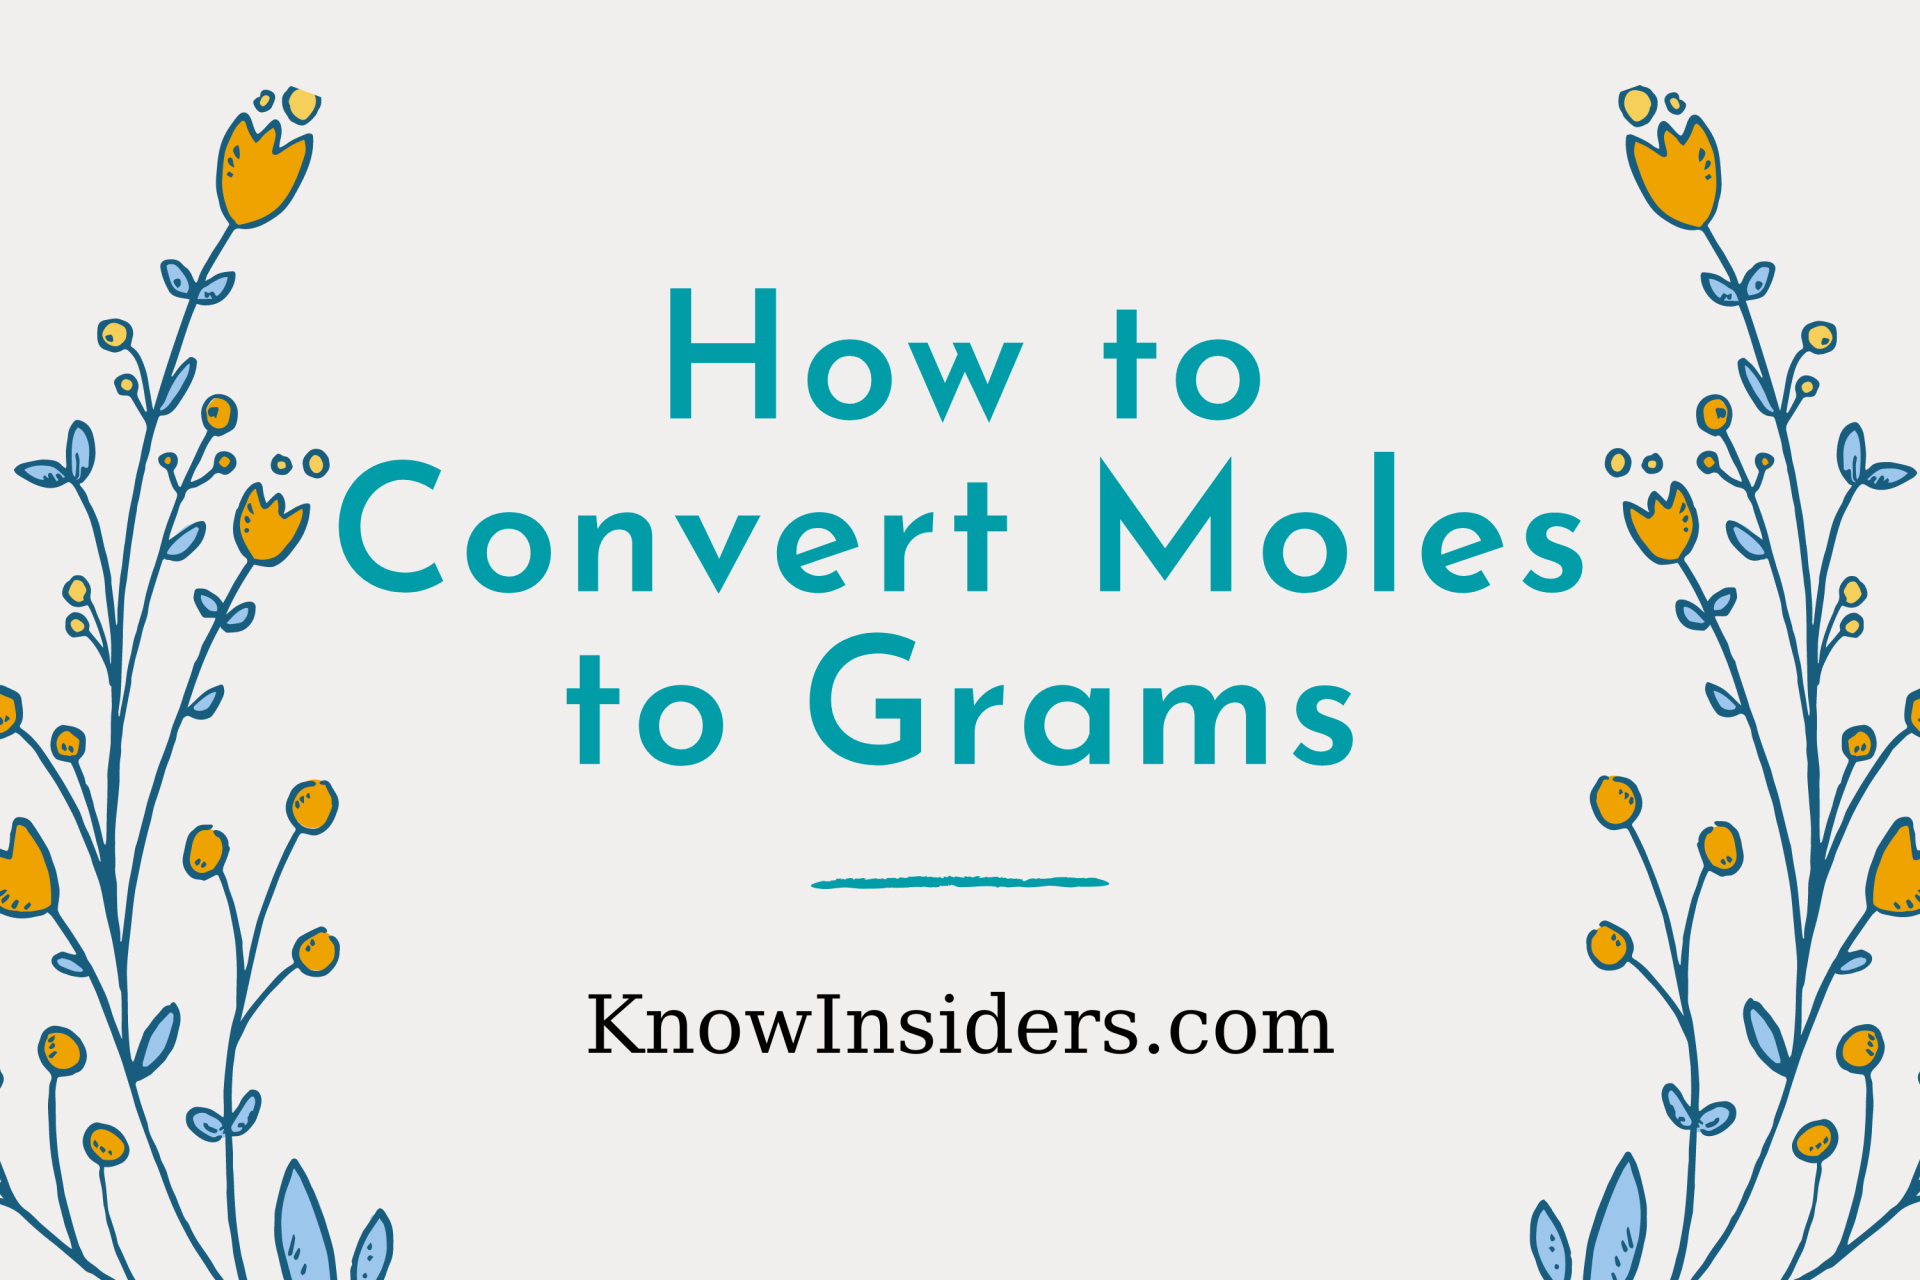 How to Convert Moles to Grams: Top Simple Steps